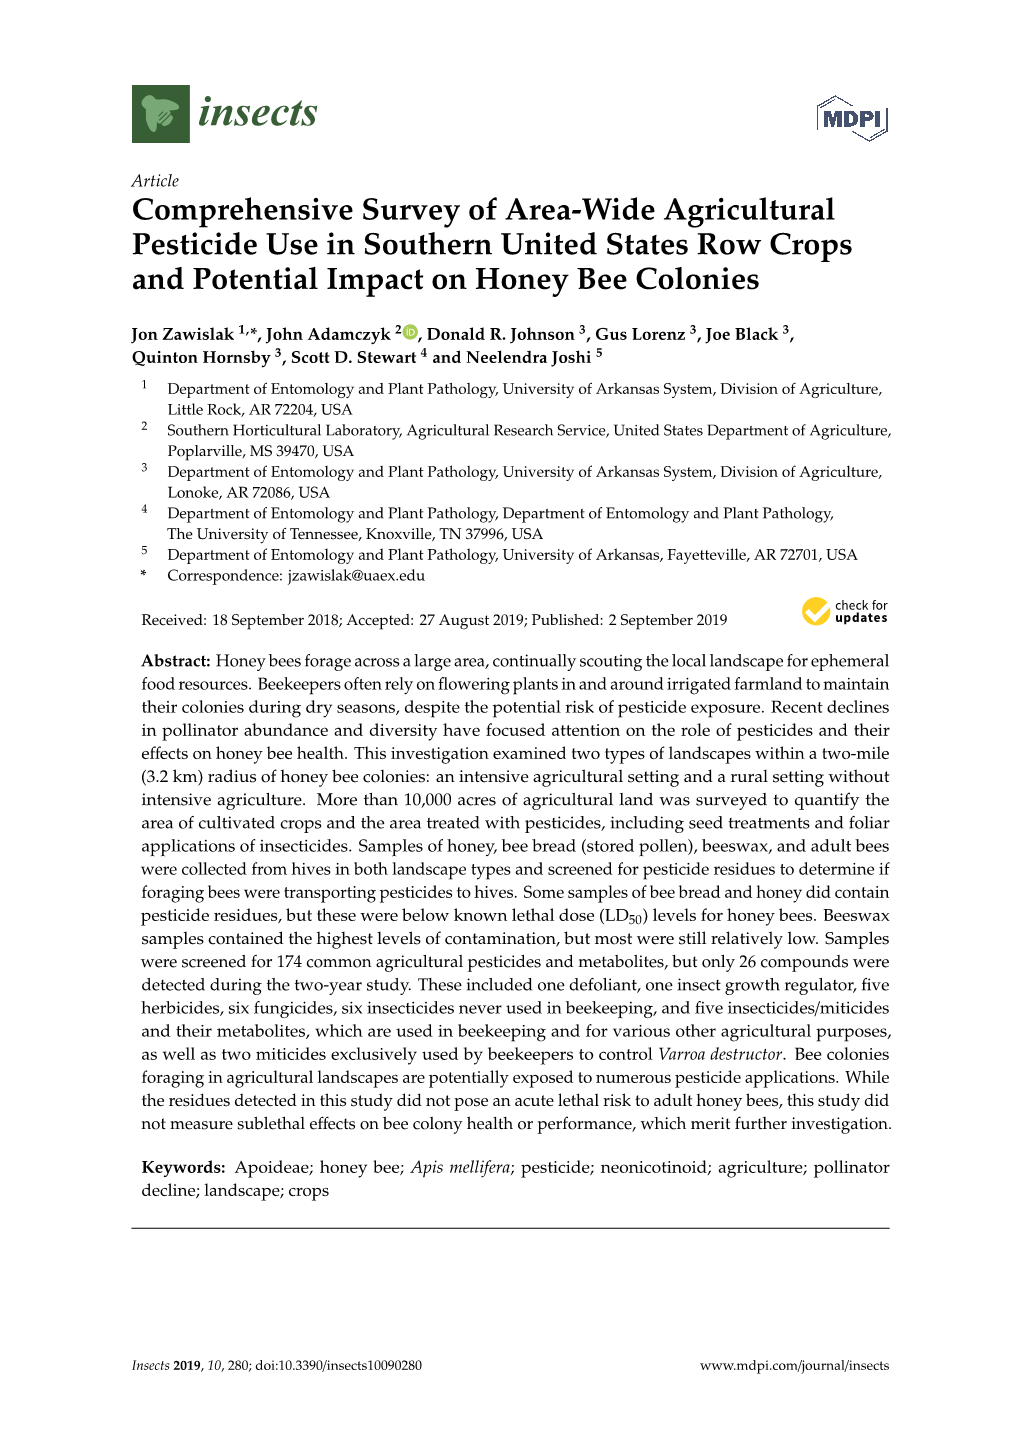 Comprehensive Survey of Area-Wide Agricultural Pesticide Use in Southern United States Row Crops and Potential Impact on Honey Bee Colonies